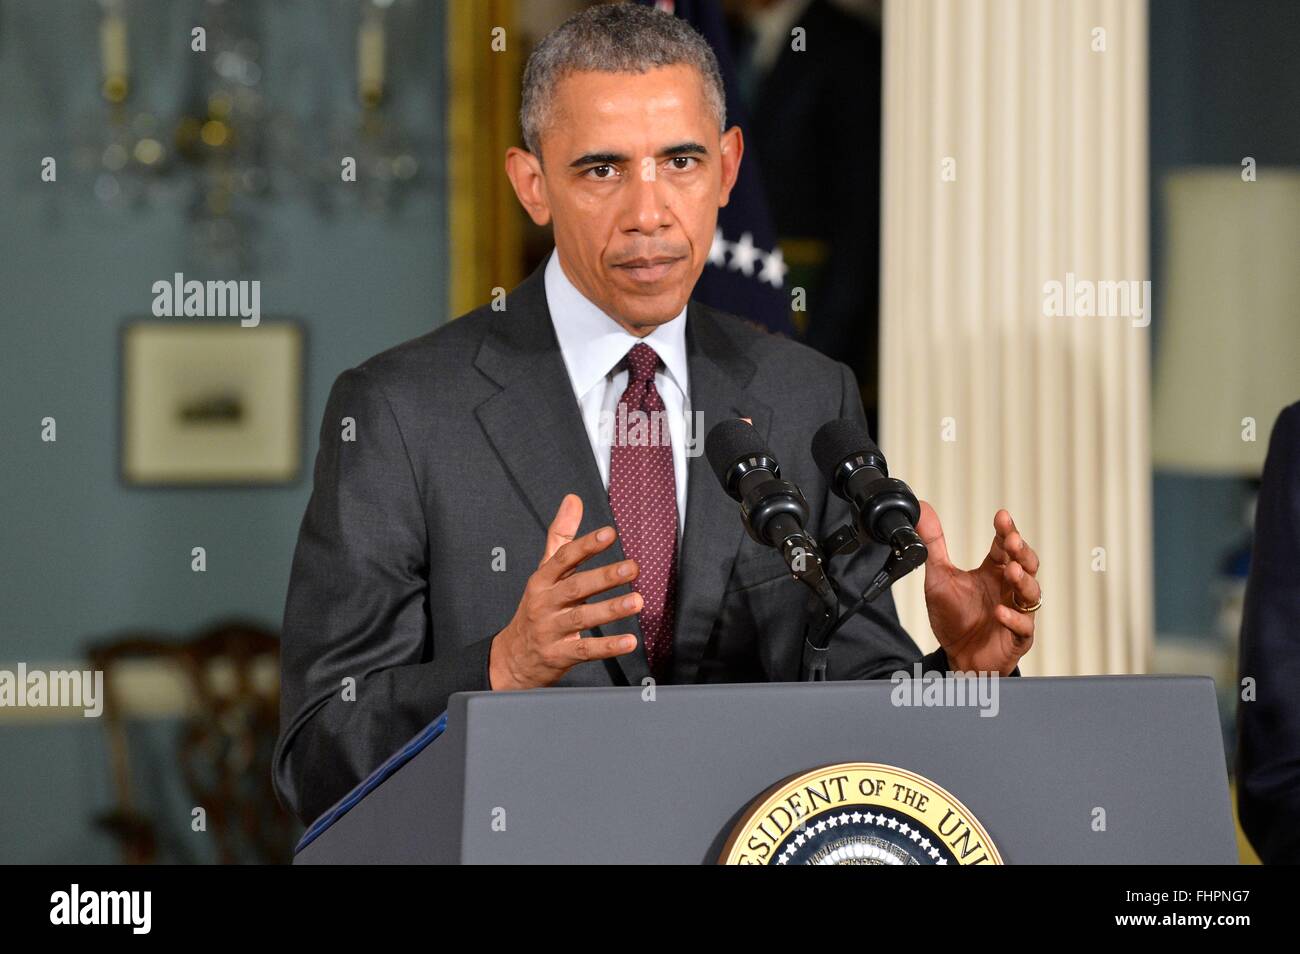 Washington DC, USA. 25th February, 2016. U.S President Barack Obama addresses the media following a meeting with the National Security Council on the global campaign to degrade and destroy ISIL at the State Department February 25, 2016 in Washington, DC.  Obama ordered his national security team to 'continue accelerating' the U.S led military campaign against the Islamic State. Stock Photo